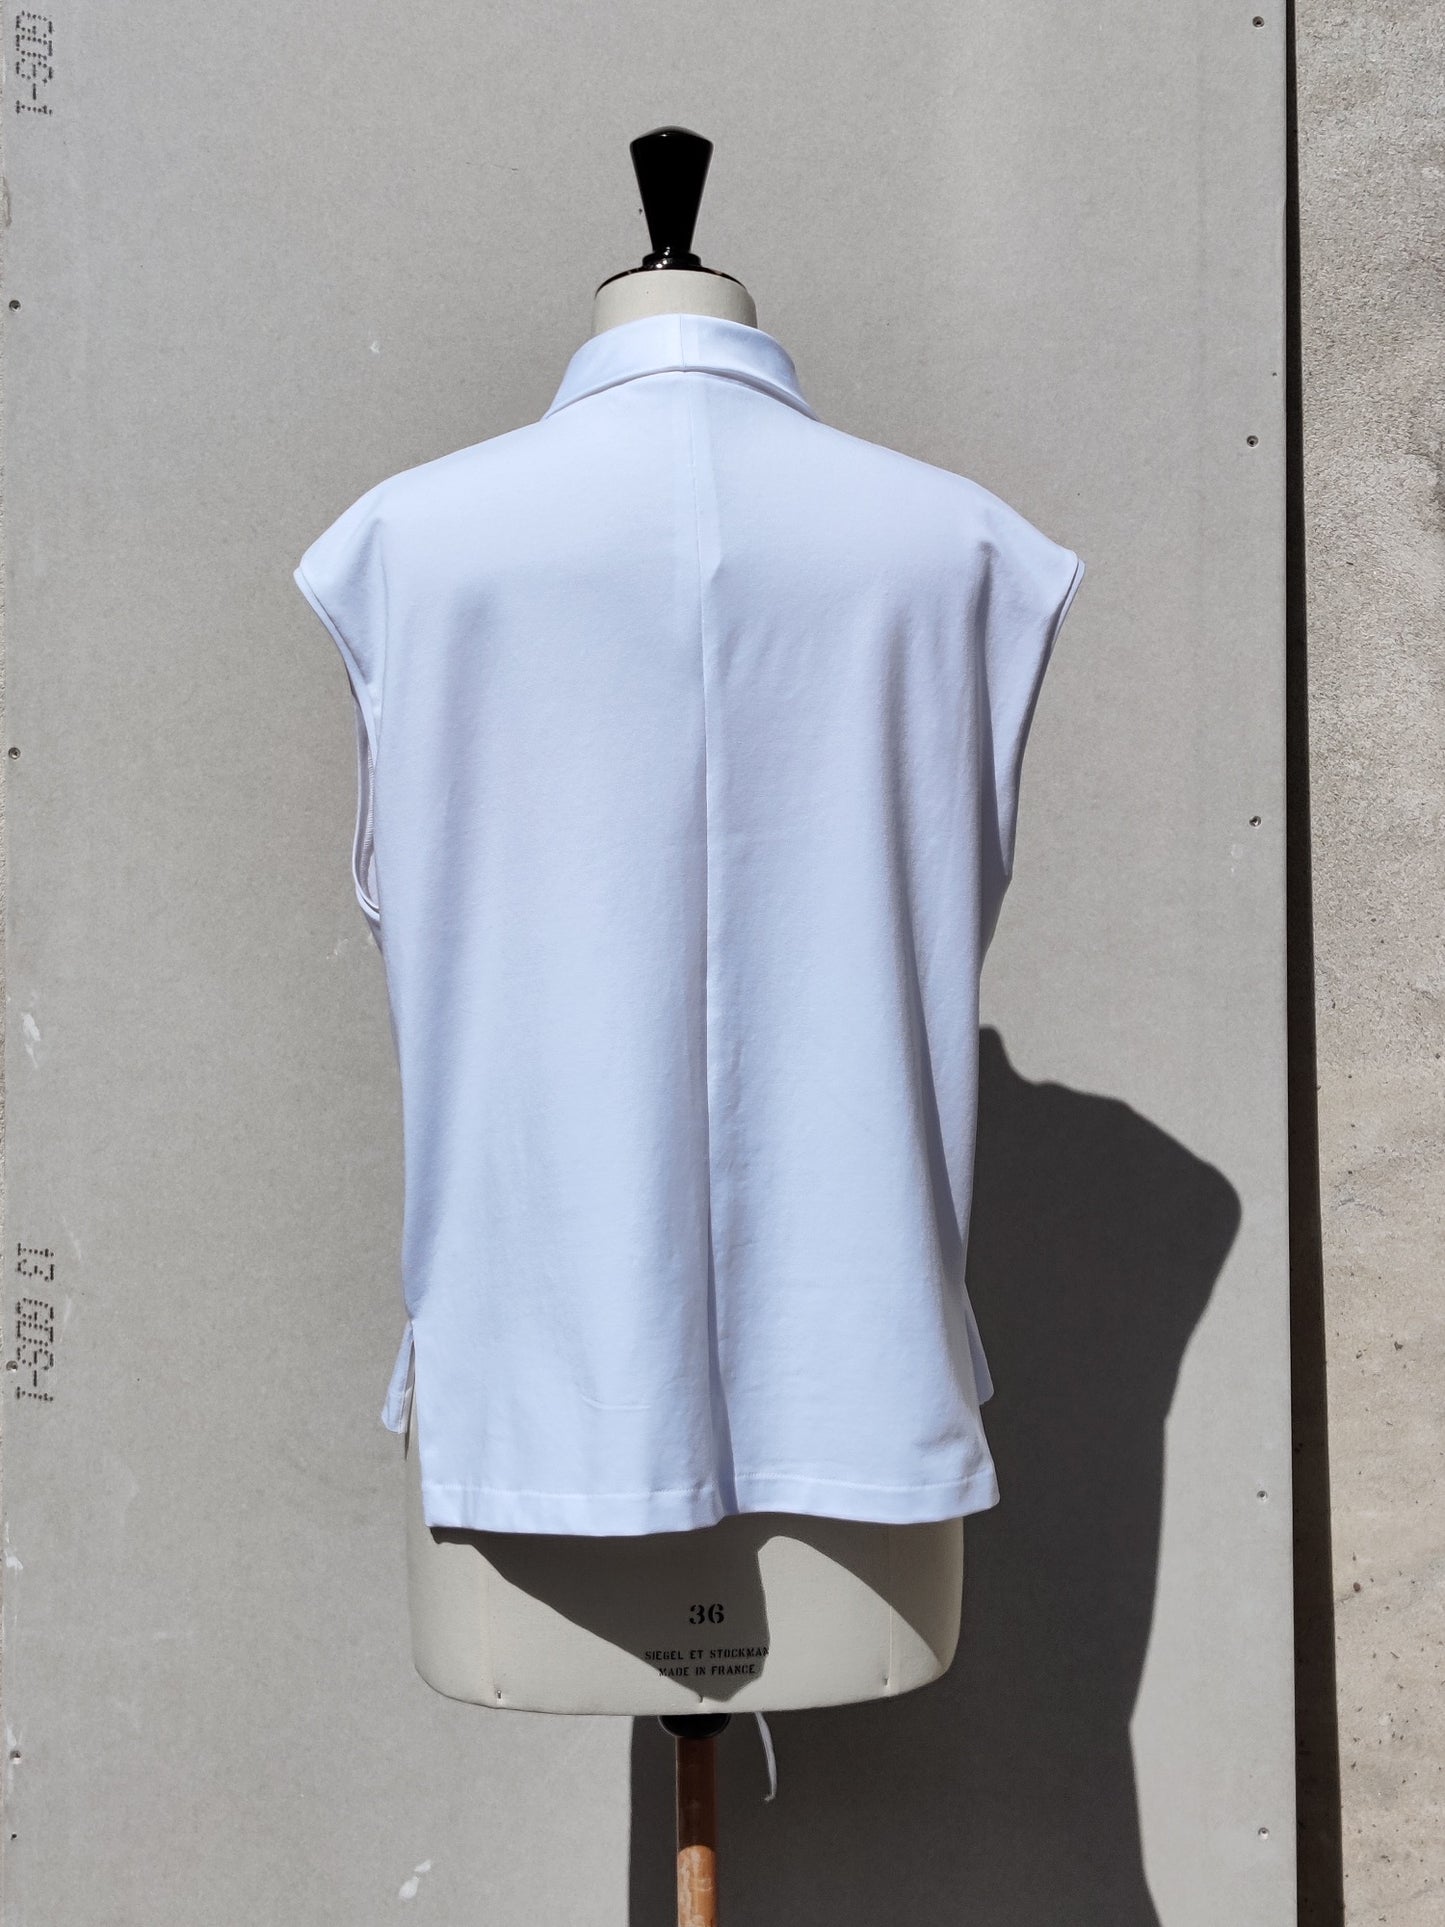 Back view: The Aryna shirt has a clean profile on the back and is Loose fit. 